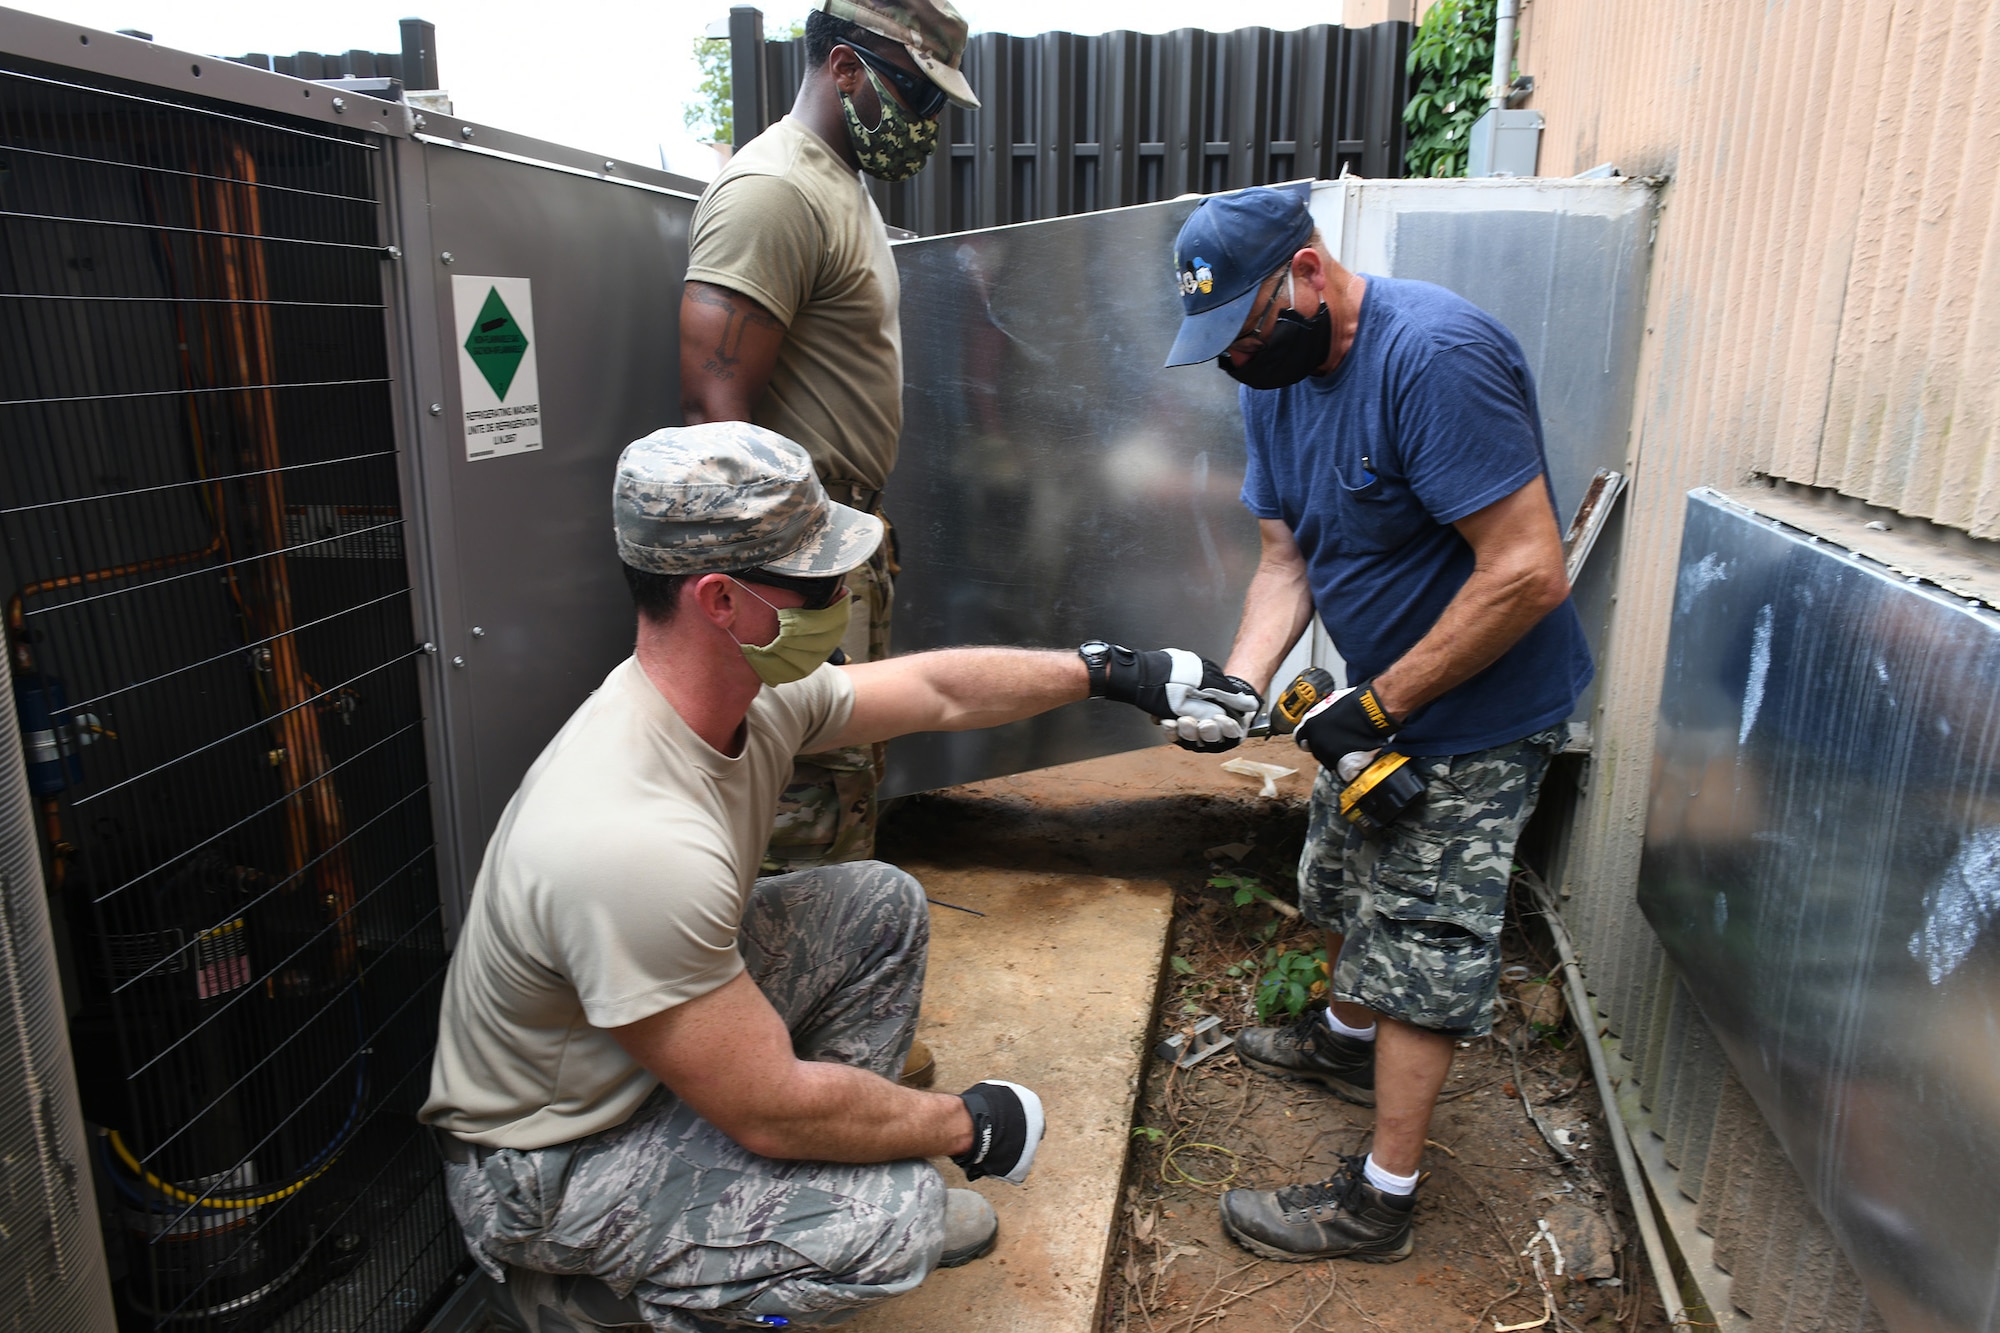 Photo shows two Airmen and a civilian working together on a HVAC unit outside.